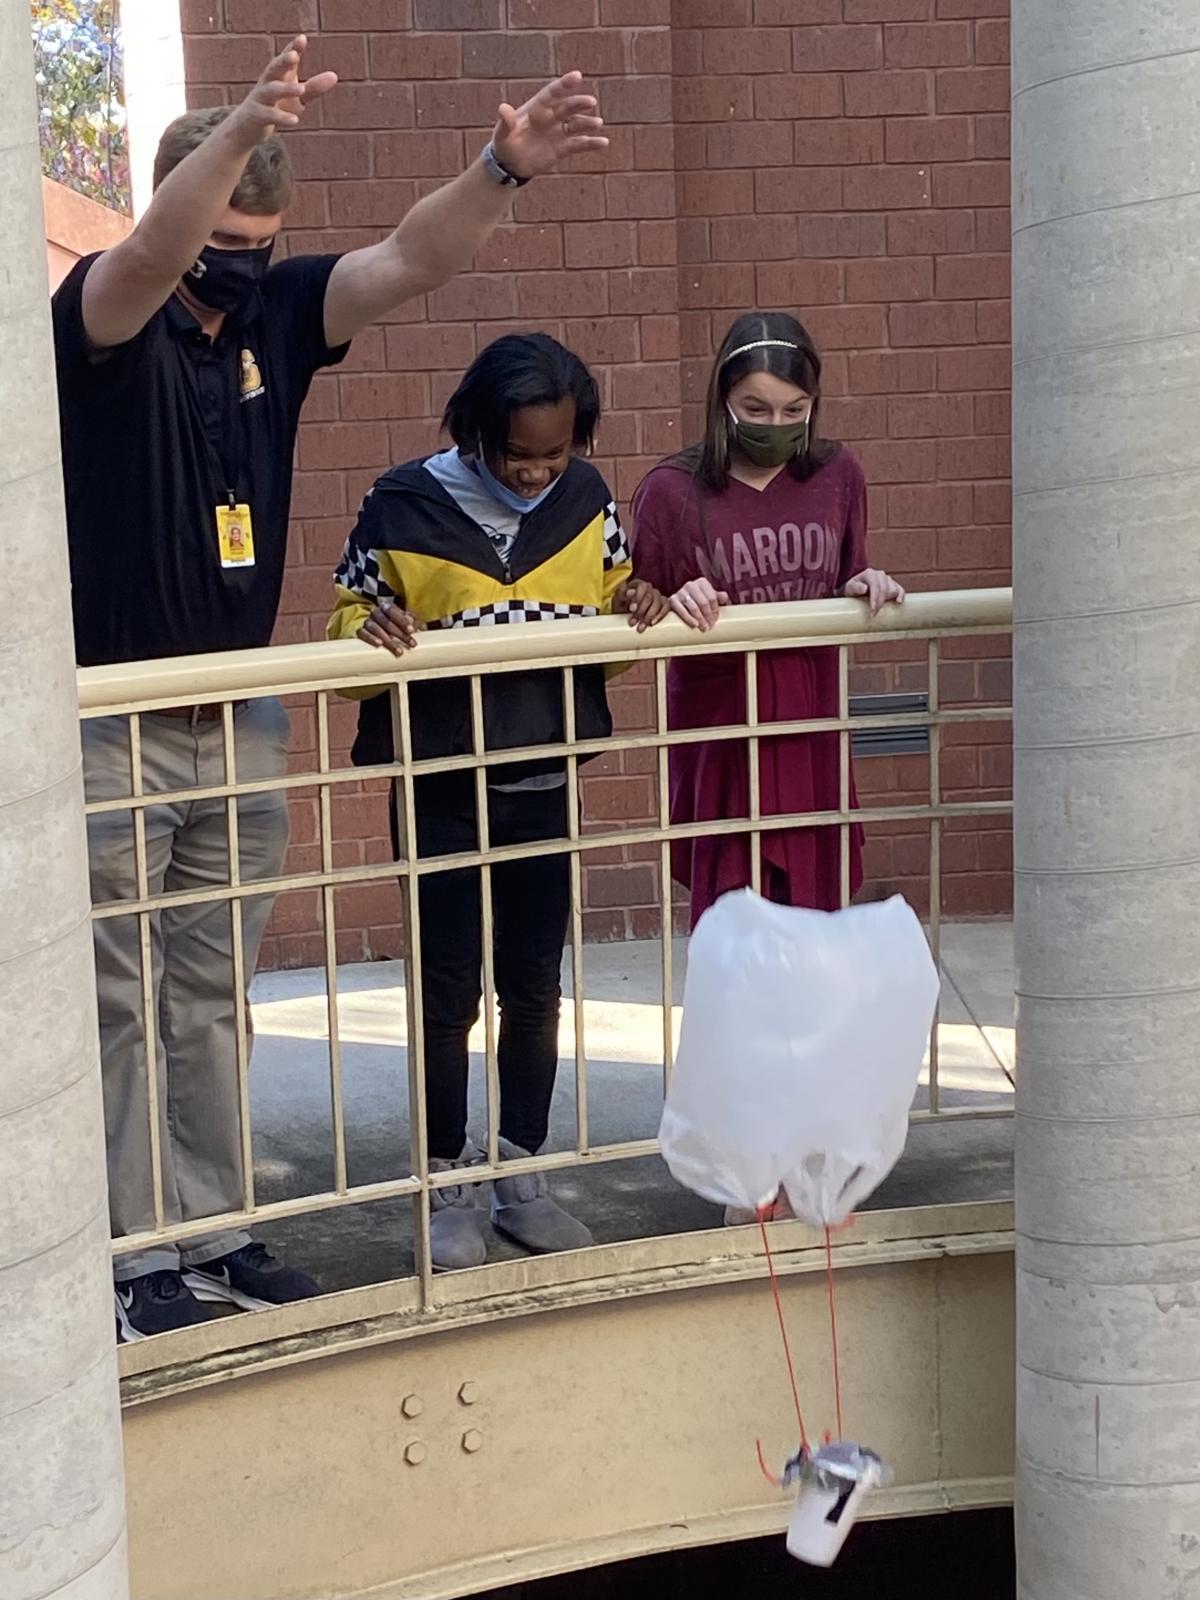 Teacher and two students drop egg at MSU SSRC